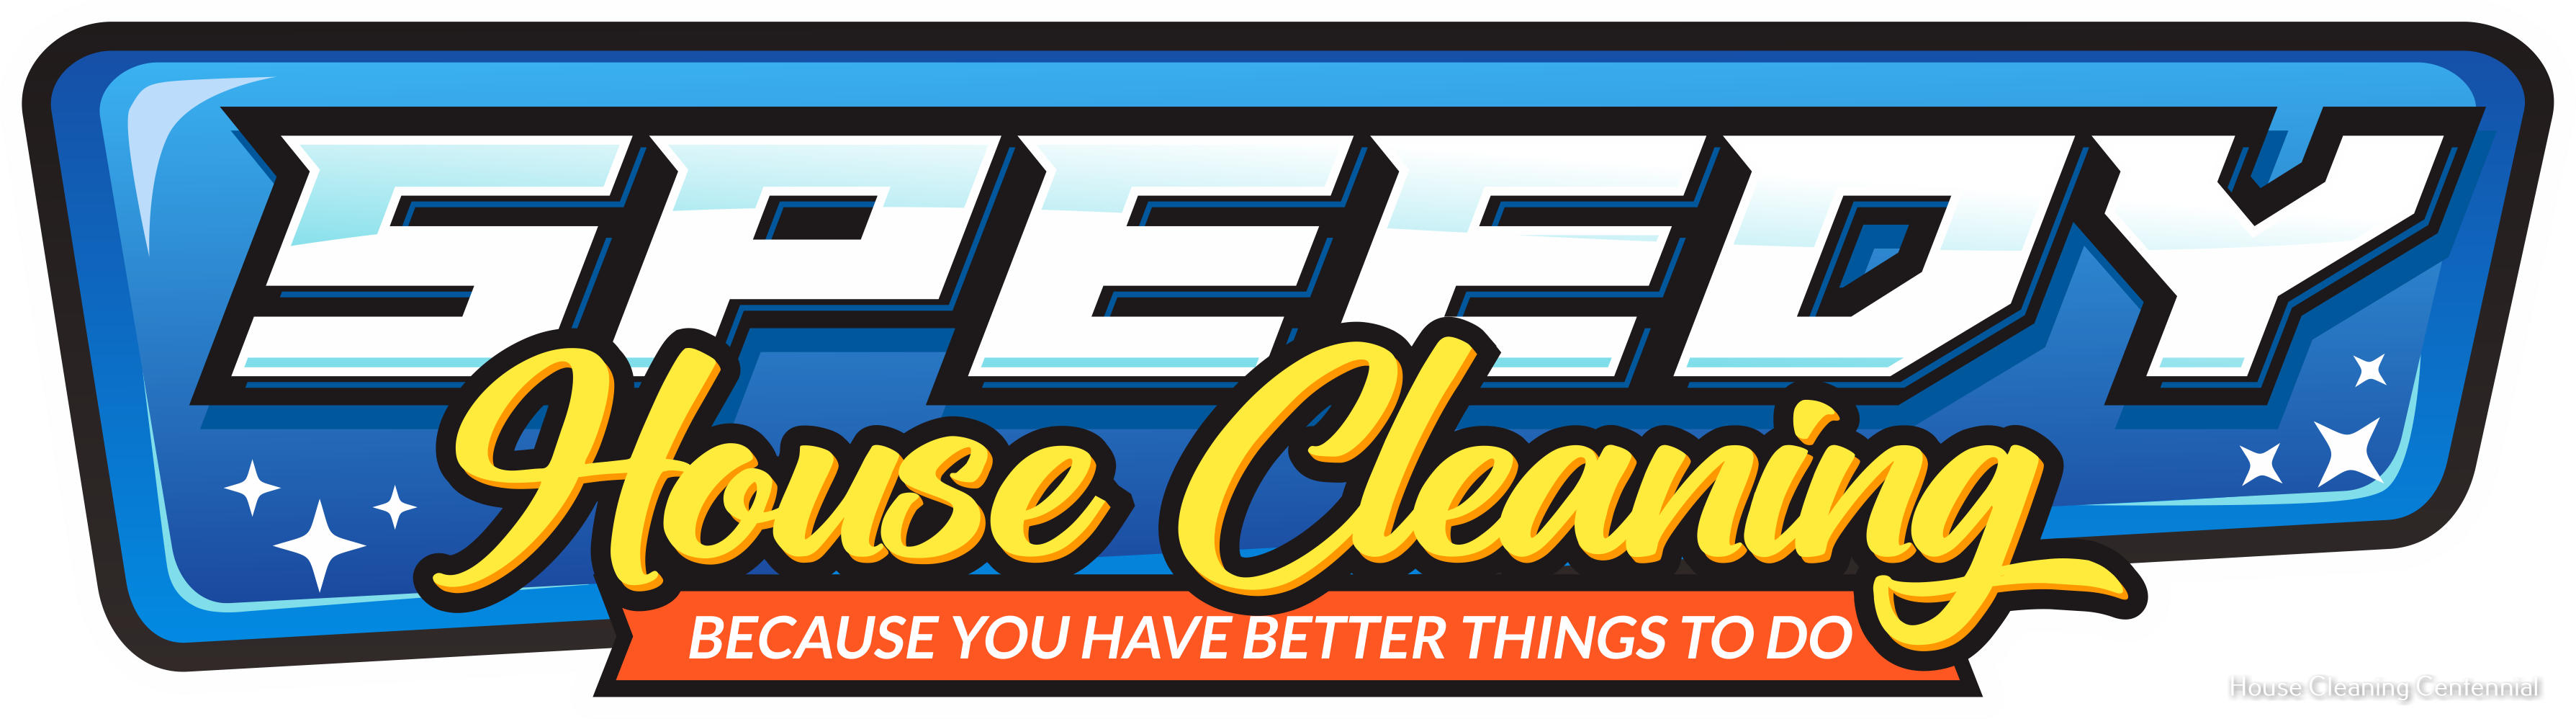 Speedy House Cleaning Shared the Things to Consider When Hiring House Cleaning Services.